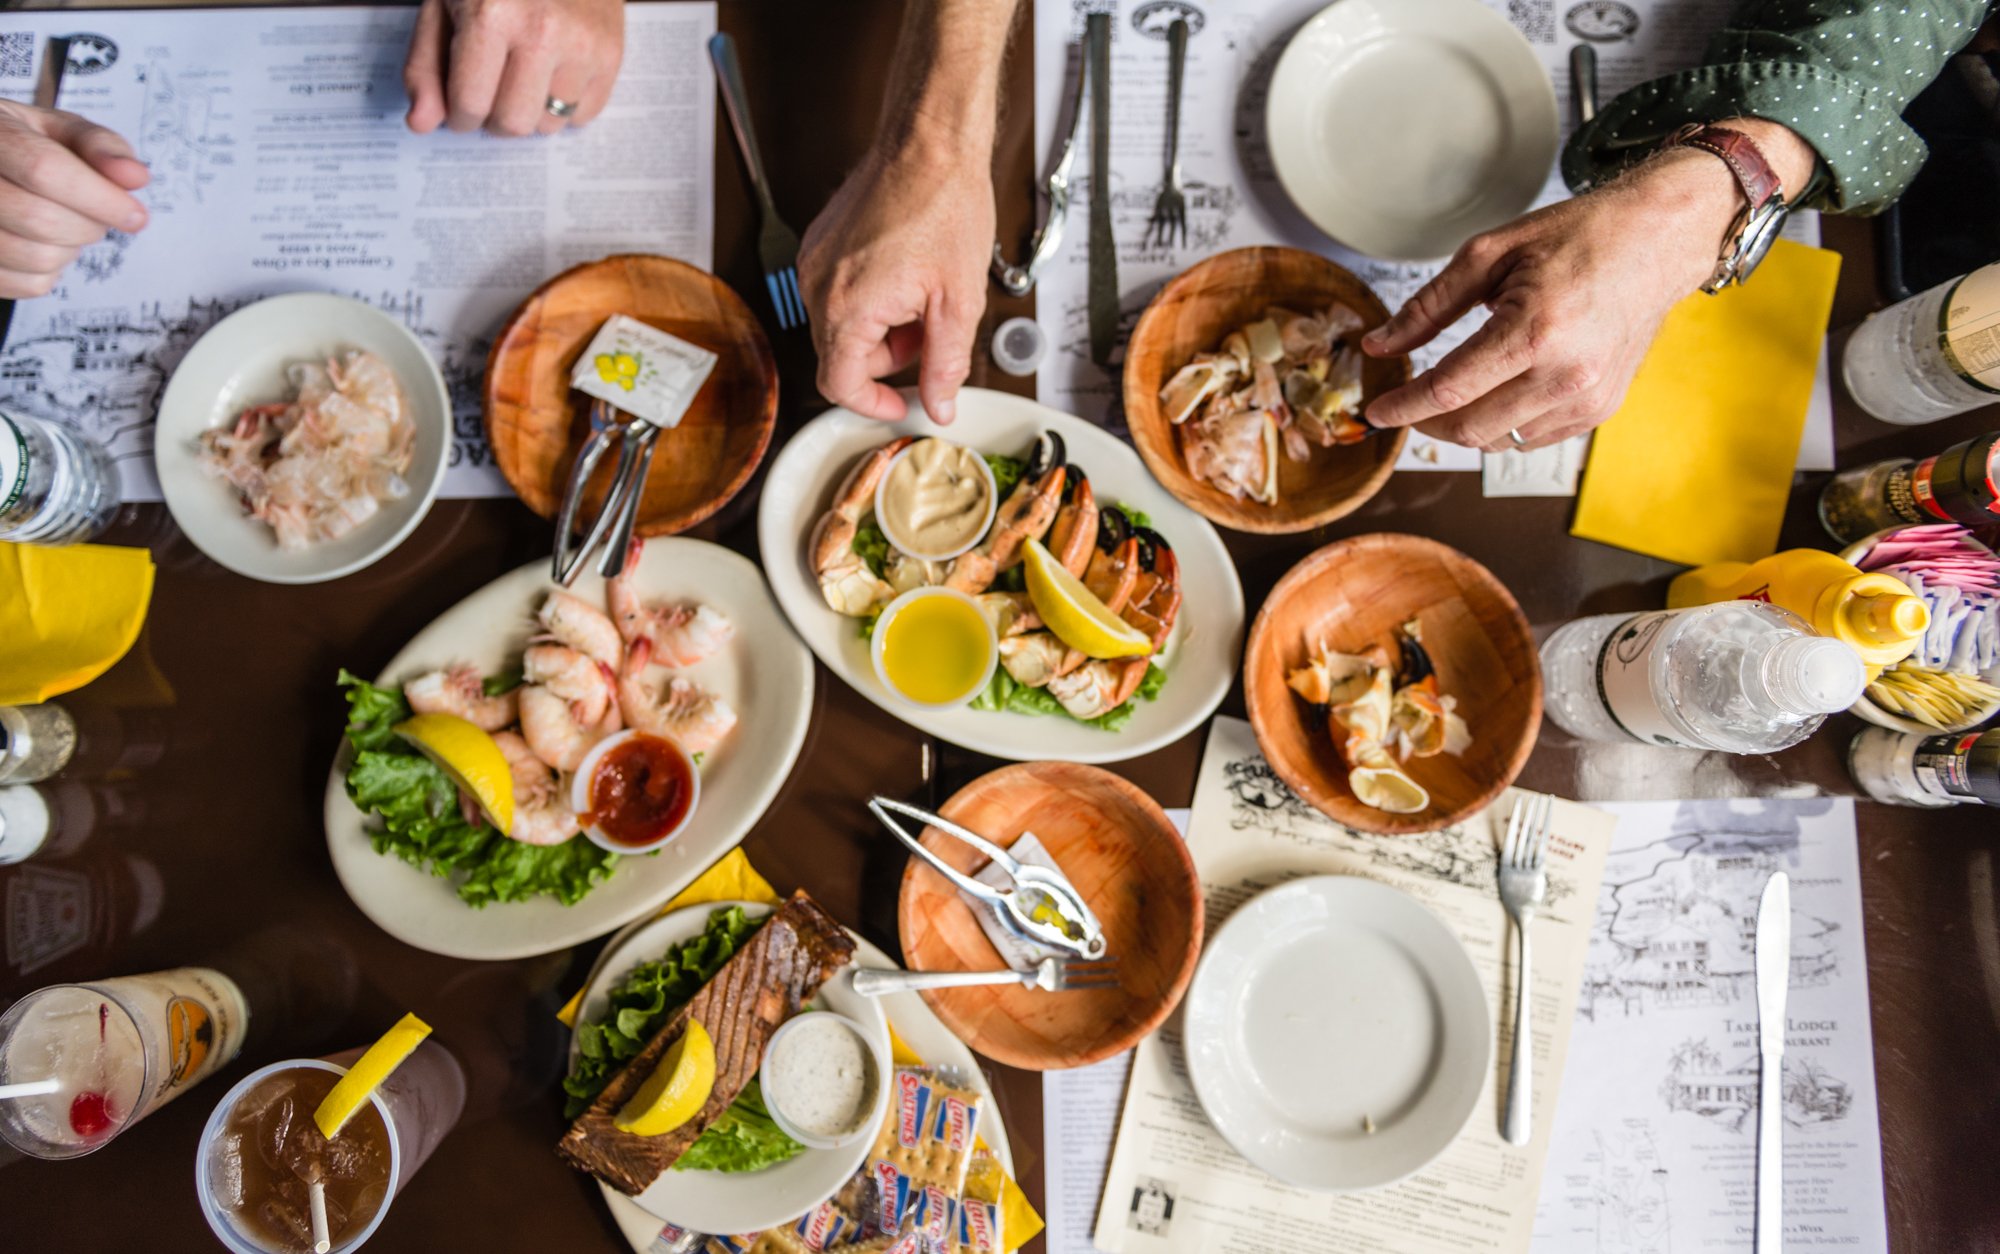 Stone crab, shrimp, and smoked salmon at Cabbage Key | What to Expect at Cabbage Key